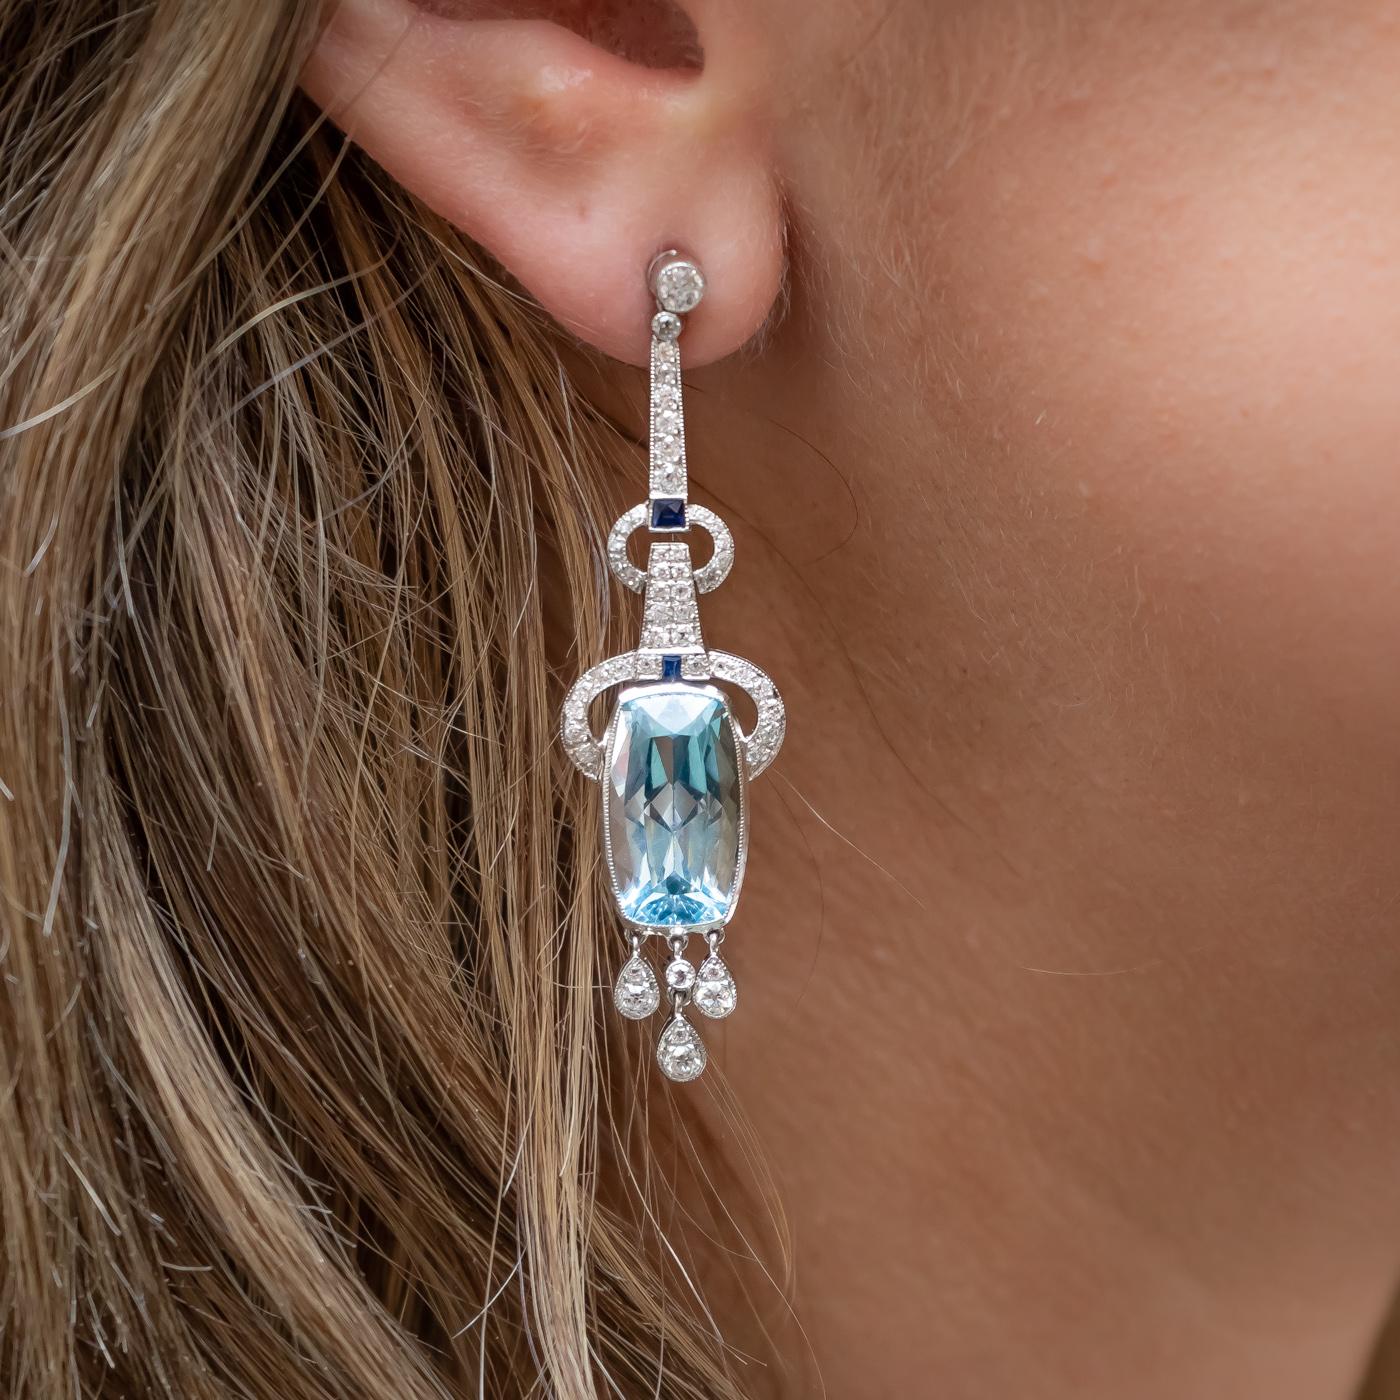 A pair of aquamarine, sapphire and diamond earrings, mounted in platinum, set with long cushion-cut aquamarines, old-cut diamonds and calibré cut sapphires. With posts and alpha fittings.